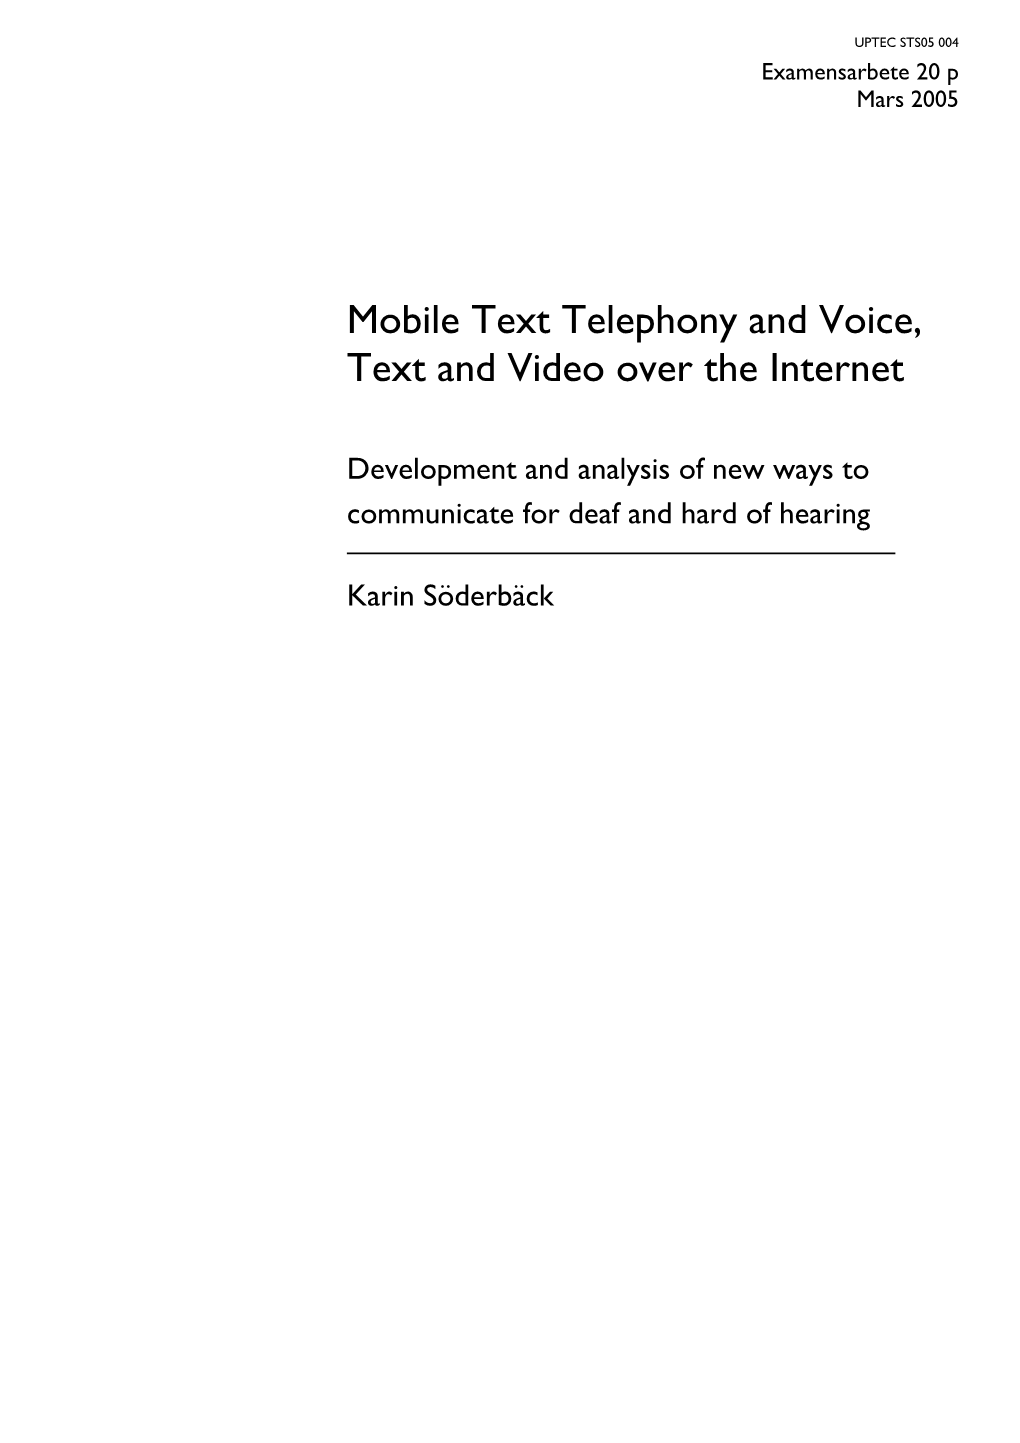 Mobile Text Telephony and Voice, Text and Video Over the Internet